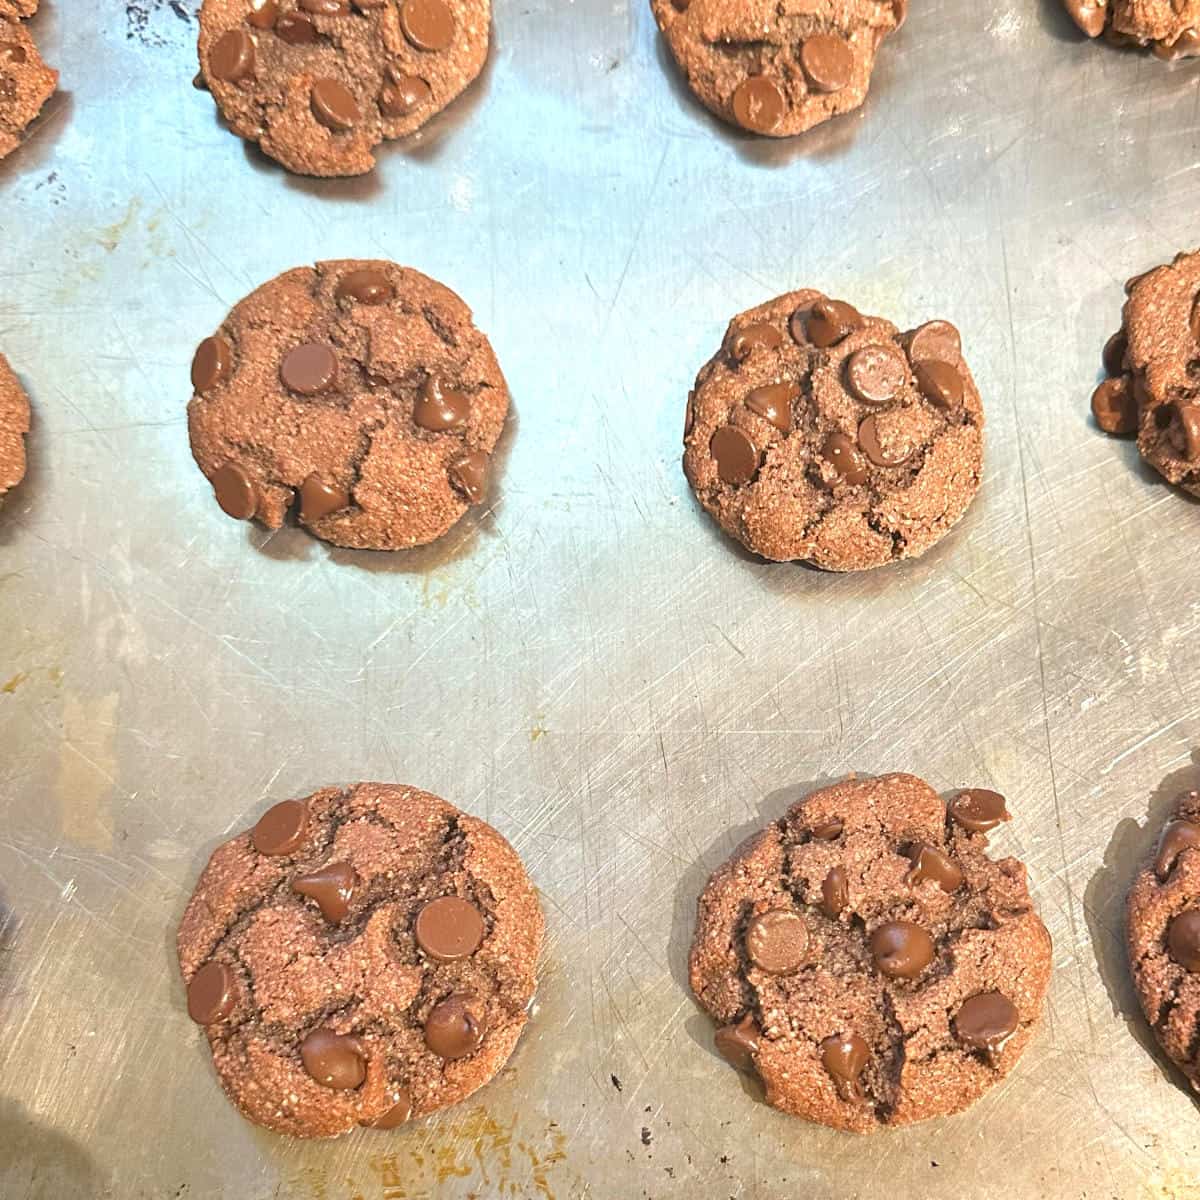 Vegan cookies on baking sheet after coming out of oven.